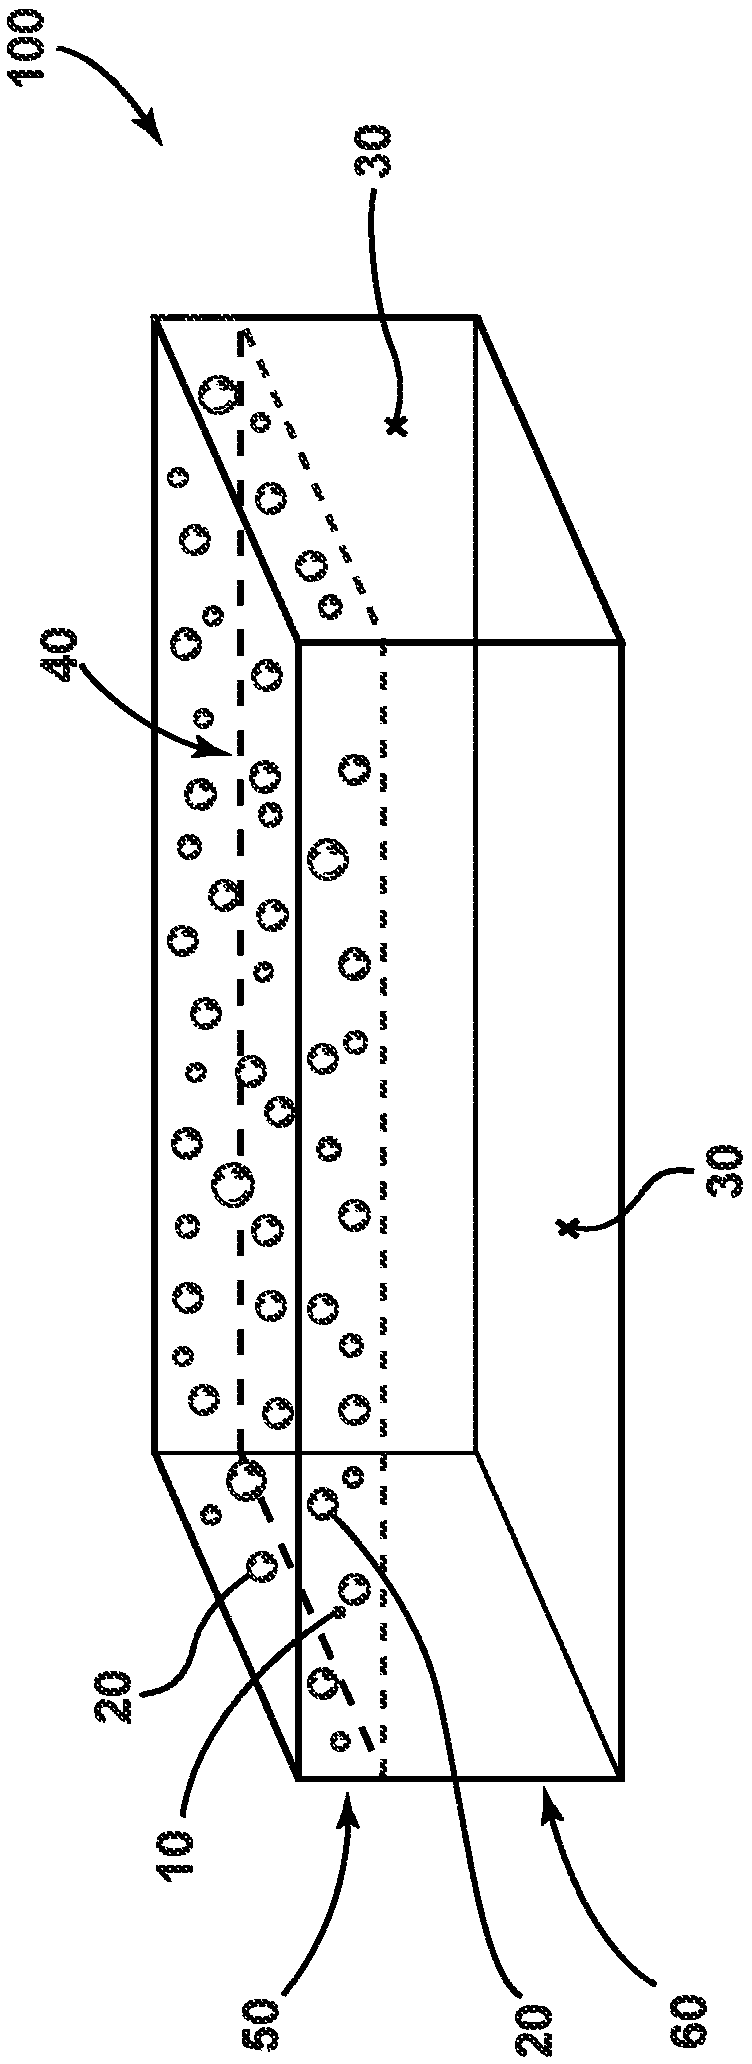 Antimicrobial phase-separable glass/polymer articles and methods for making the same